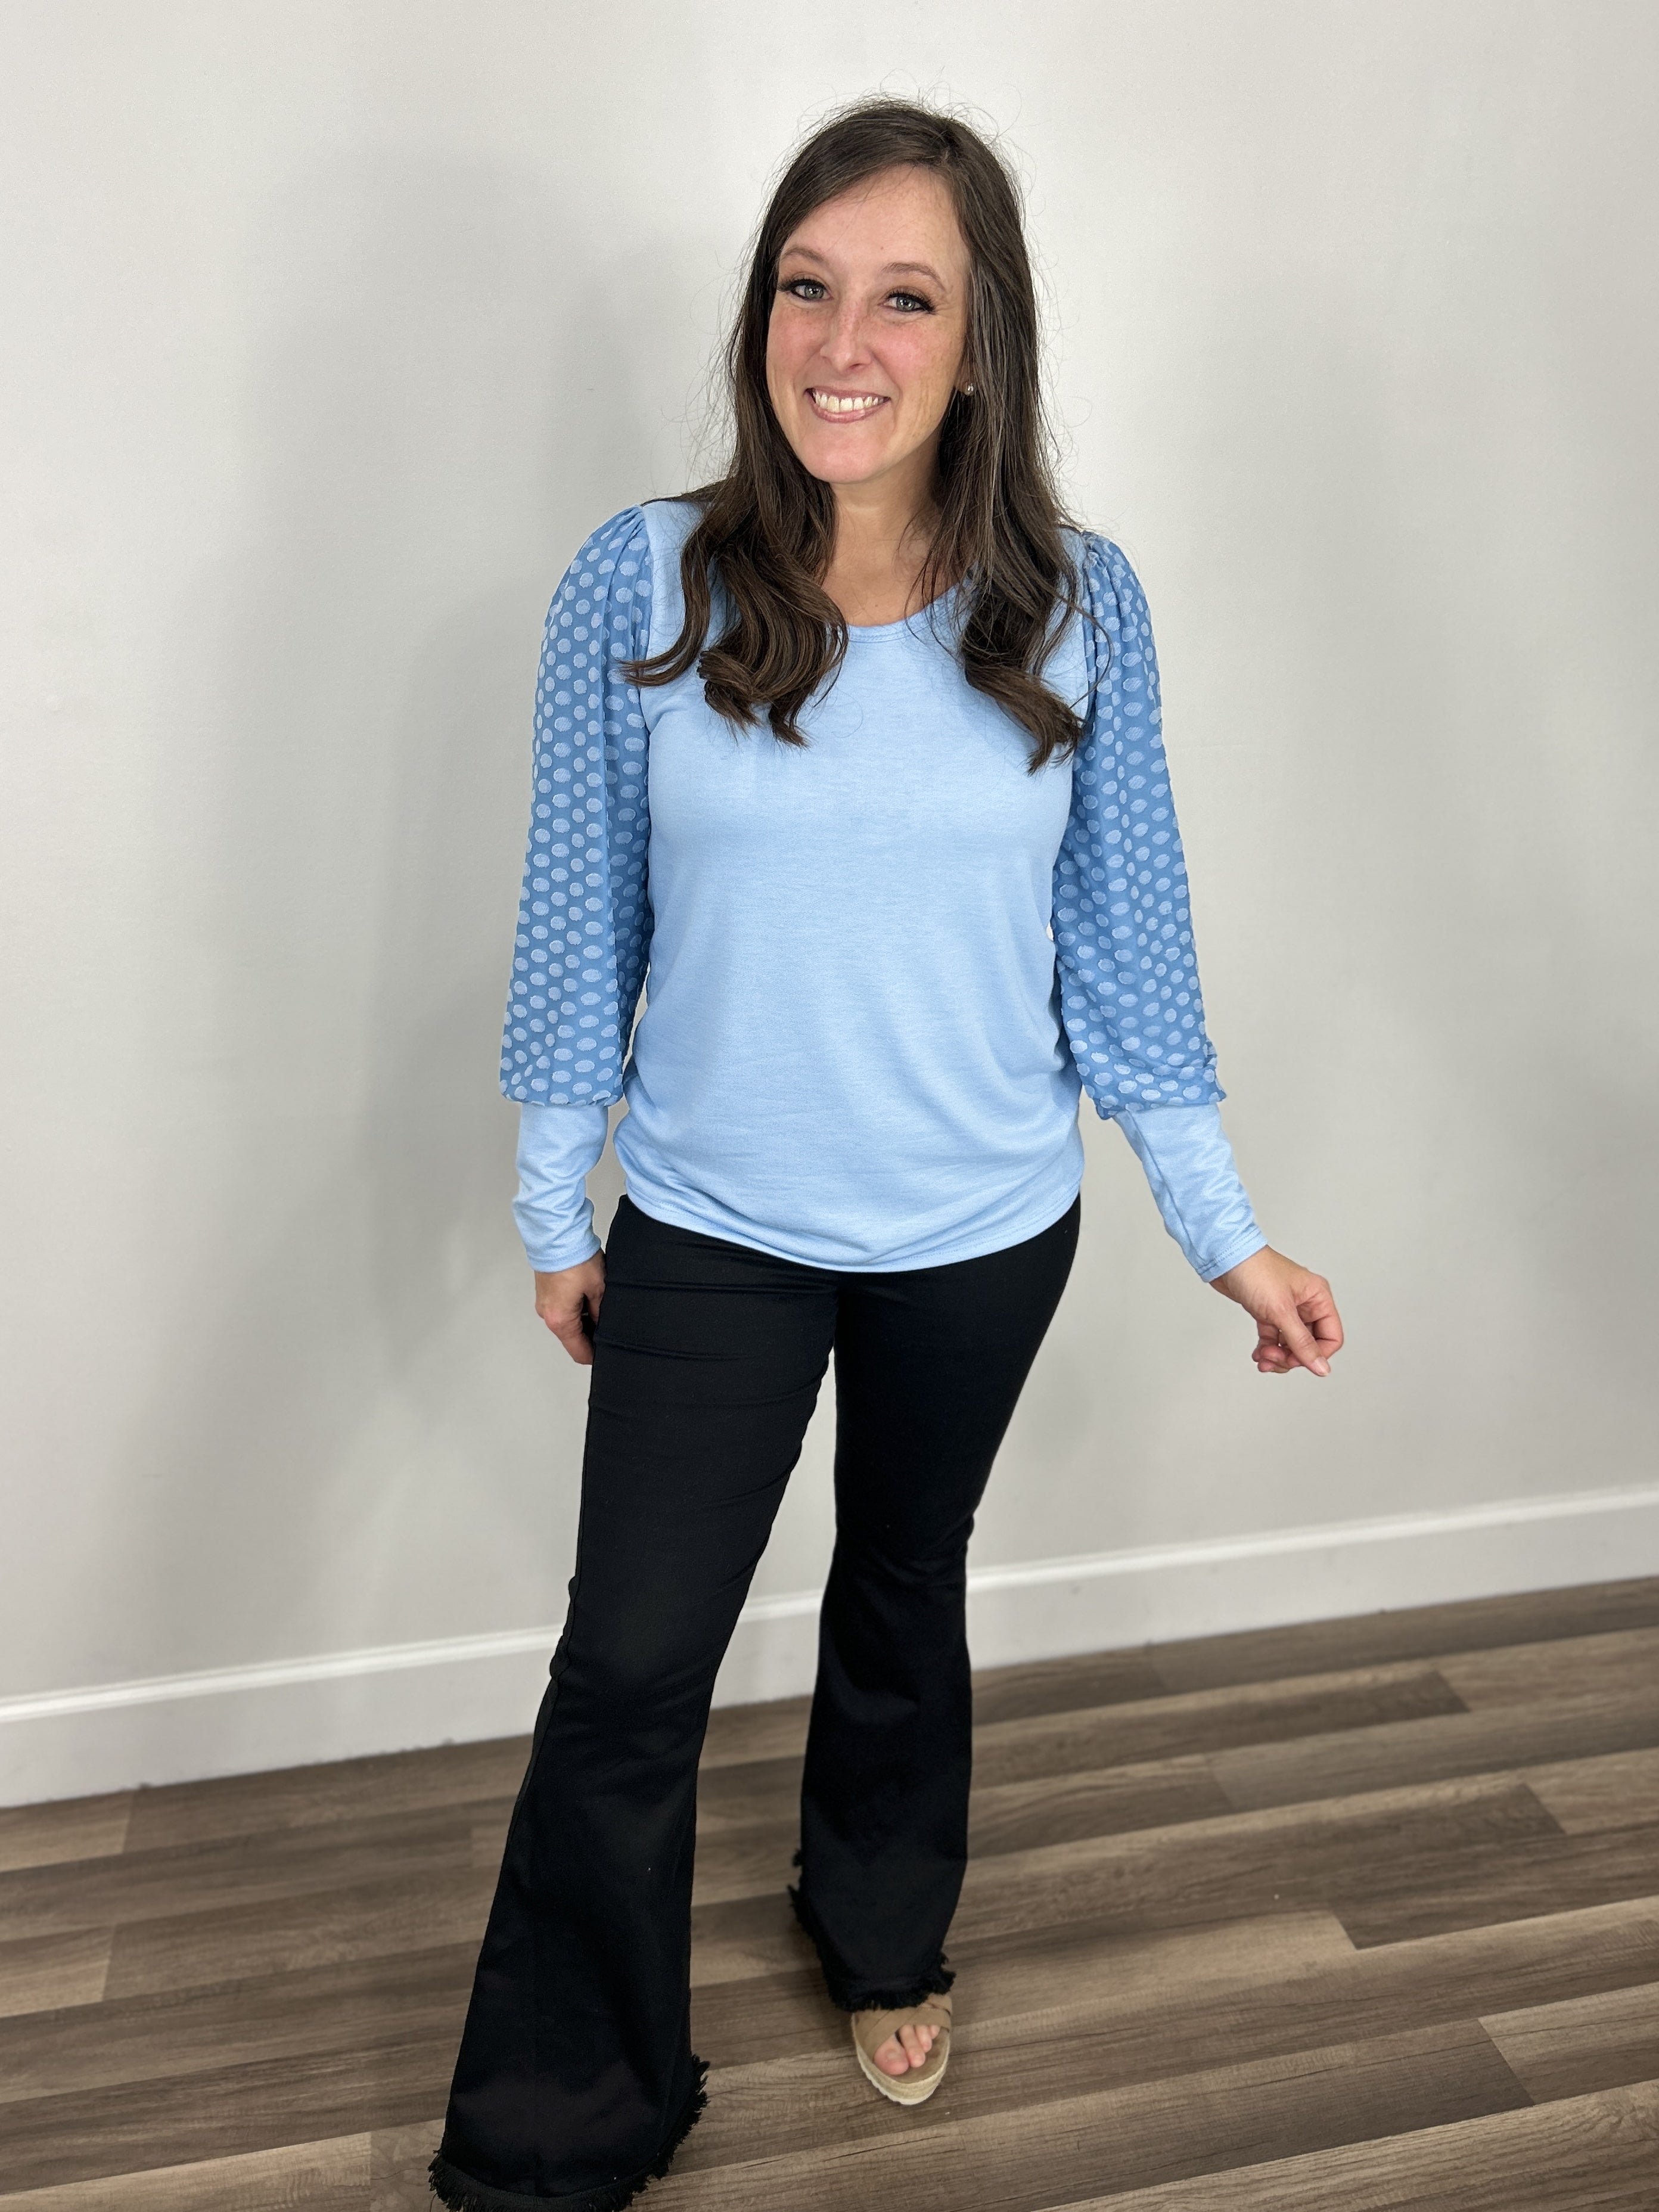 Women's blue top with dotted long sleeves paired with black flare pants and taupe sandals.